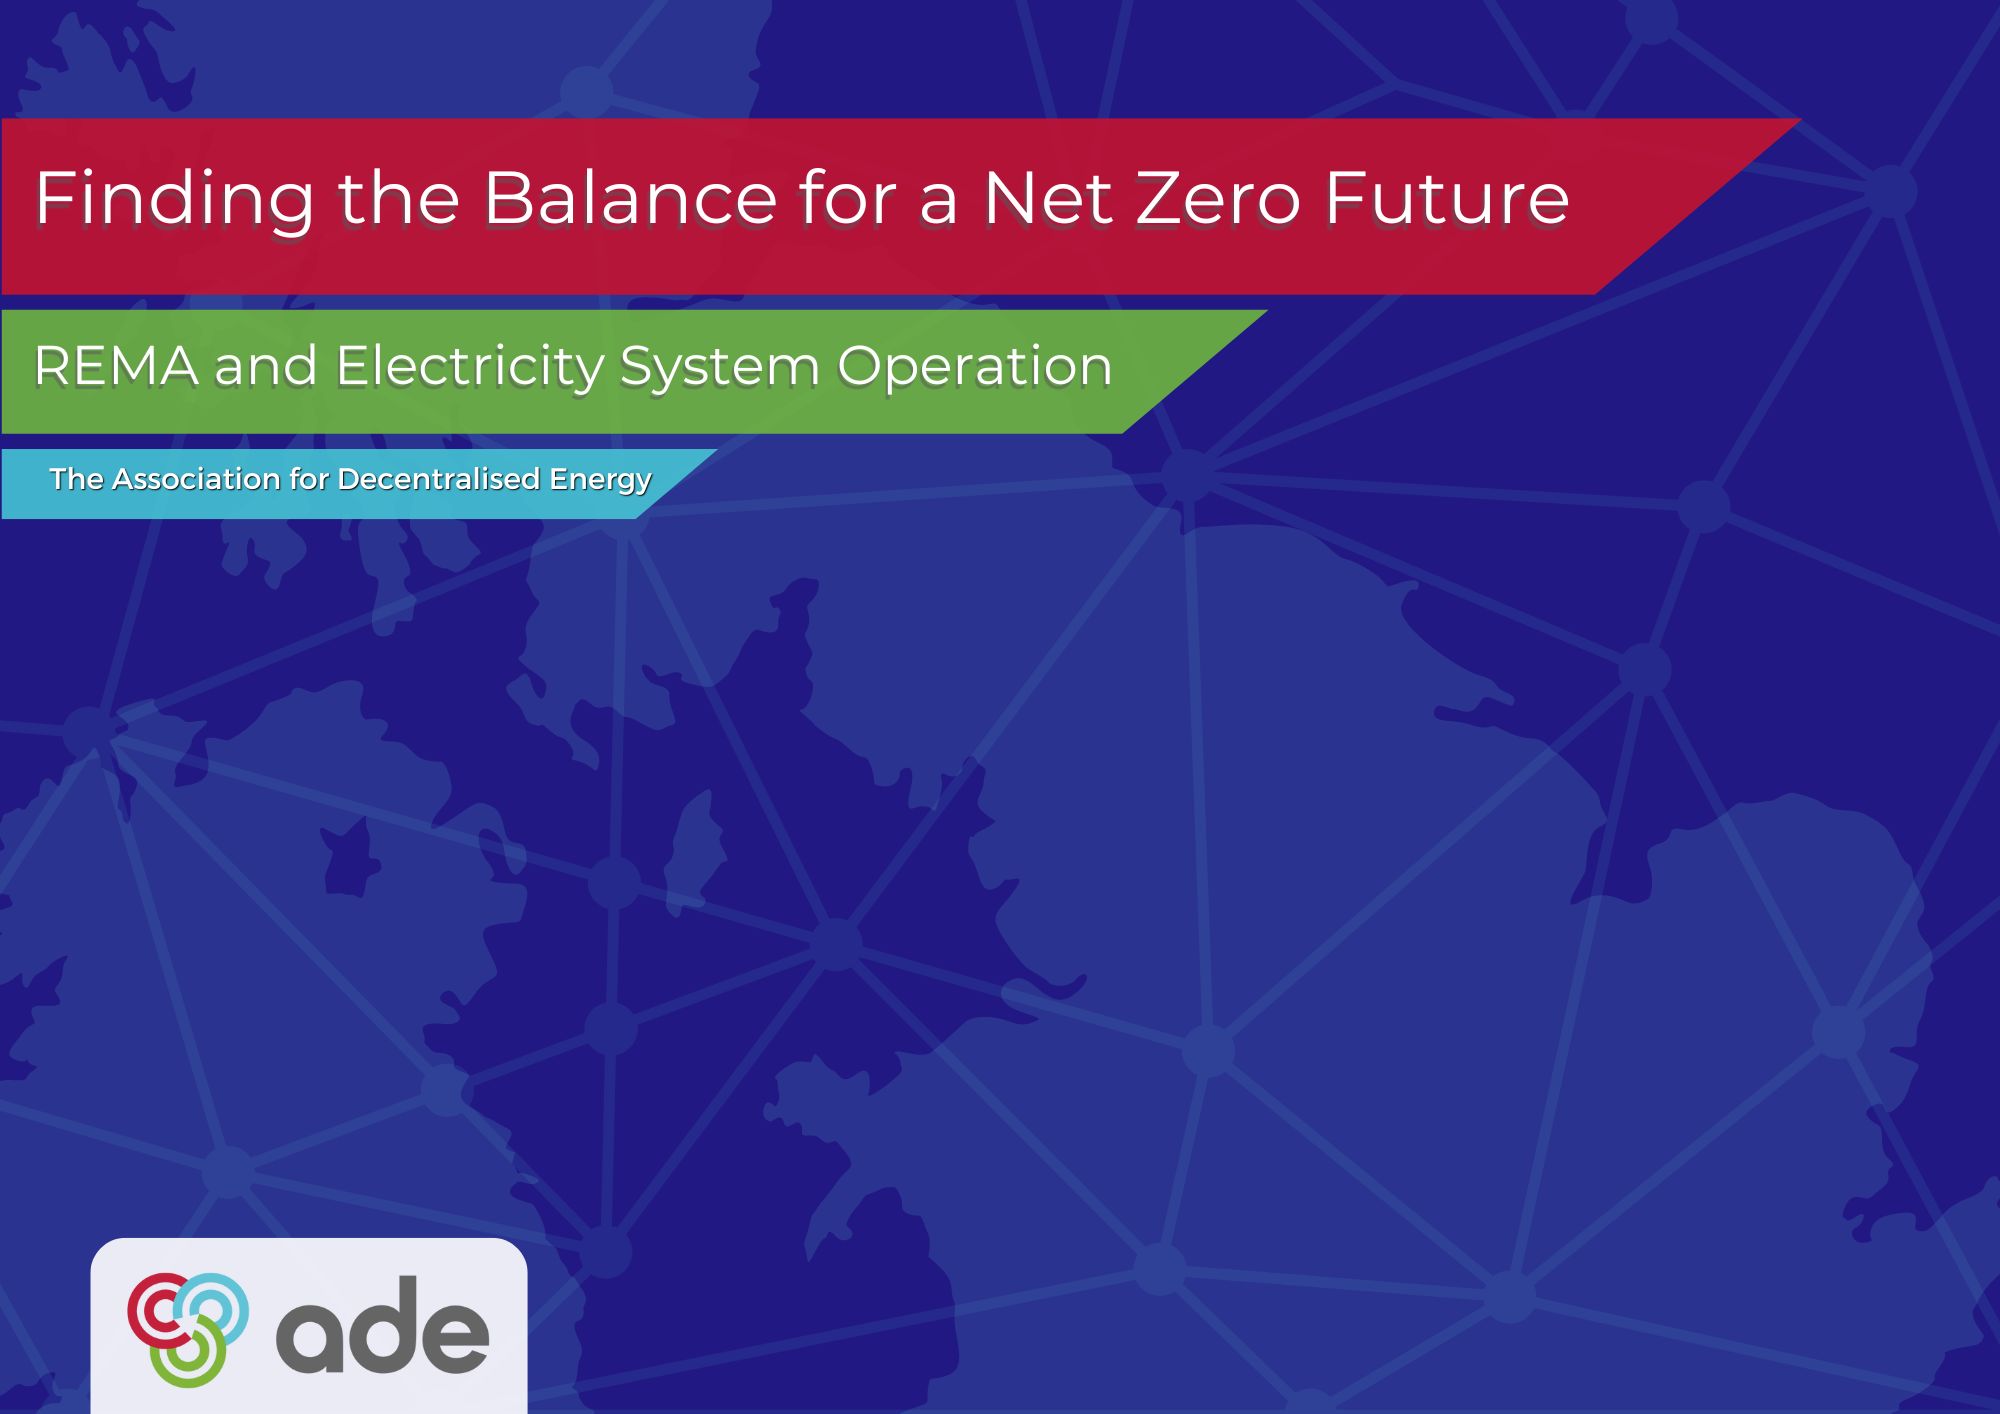 Finding the Balance for a Net Zero Future, REMA and Electricity System Operation